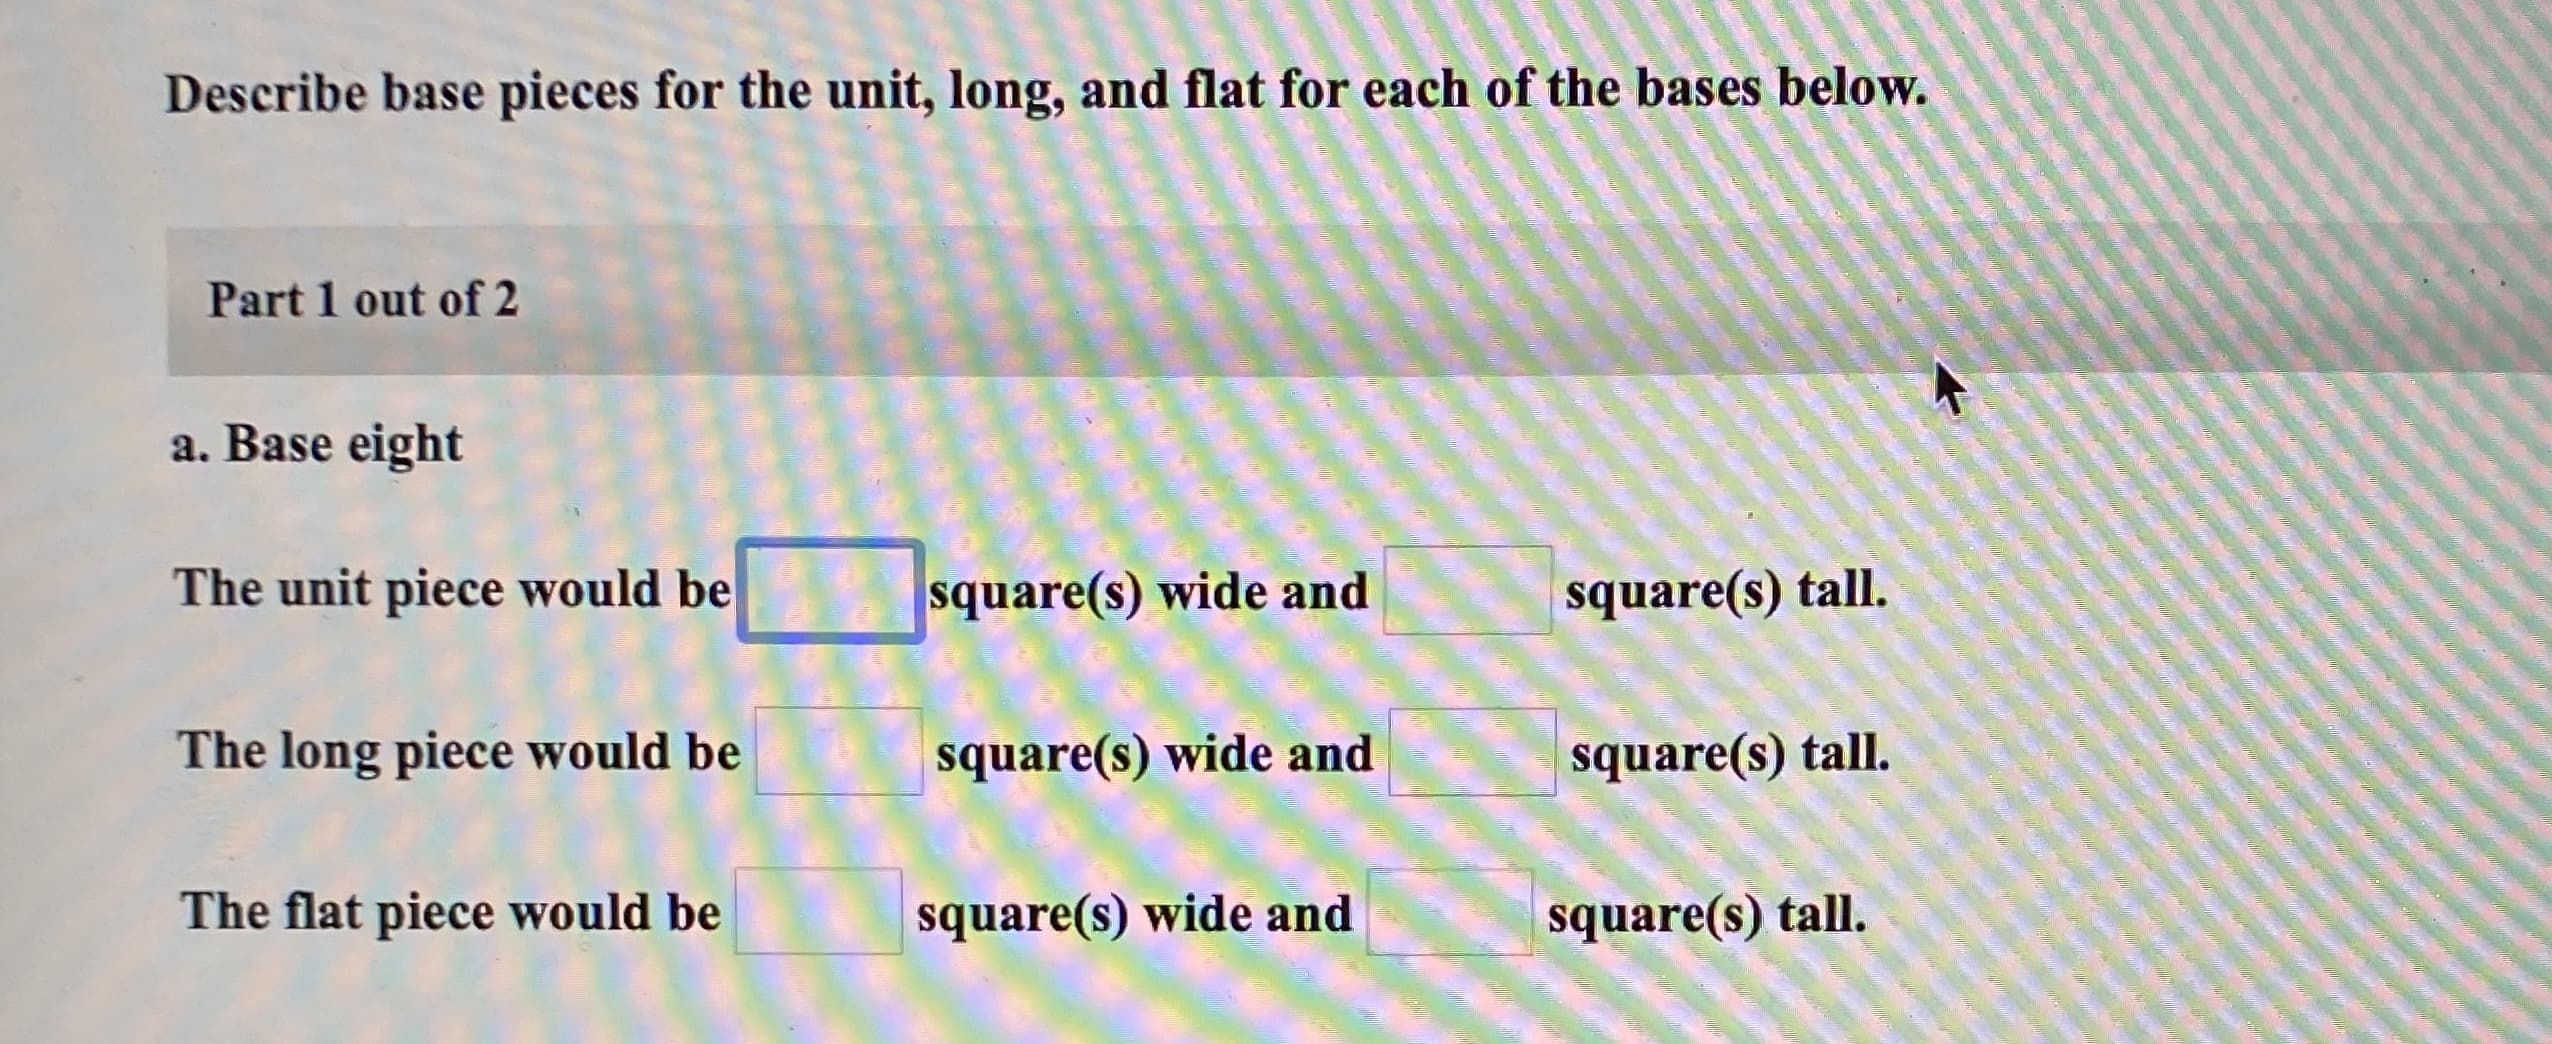 Describe base pieces for the unit, long, and flat for each of the bases below.
Part 1 out of 2
a. Base eight
The unit piece would be
square(s) wide and
square(s) tall.
The long piece would be
square(s) wide and
square(s) tall.
The flat piece would be
square(s) wide and
square(s) tall.
